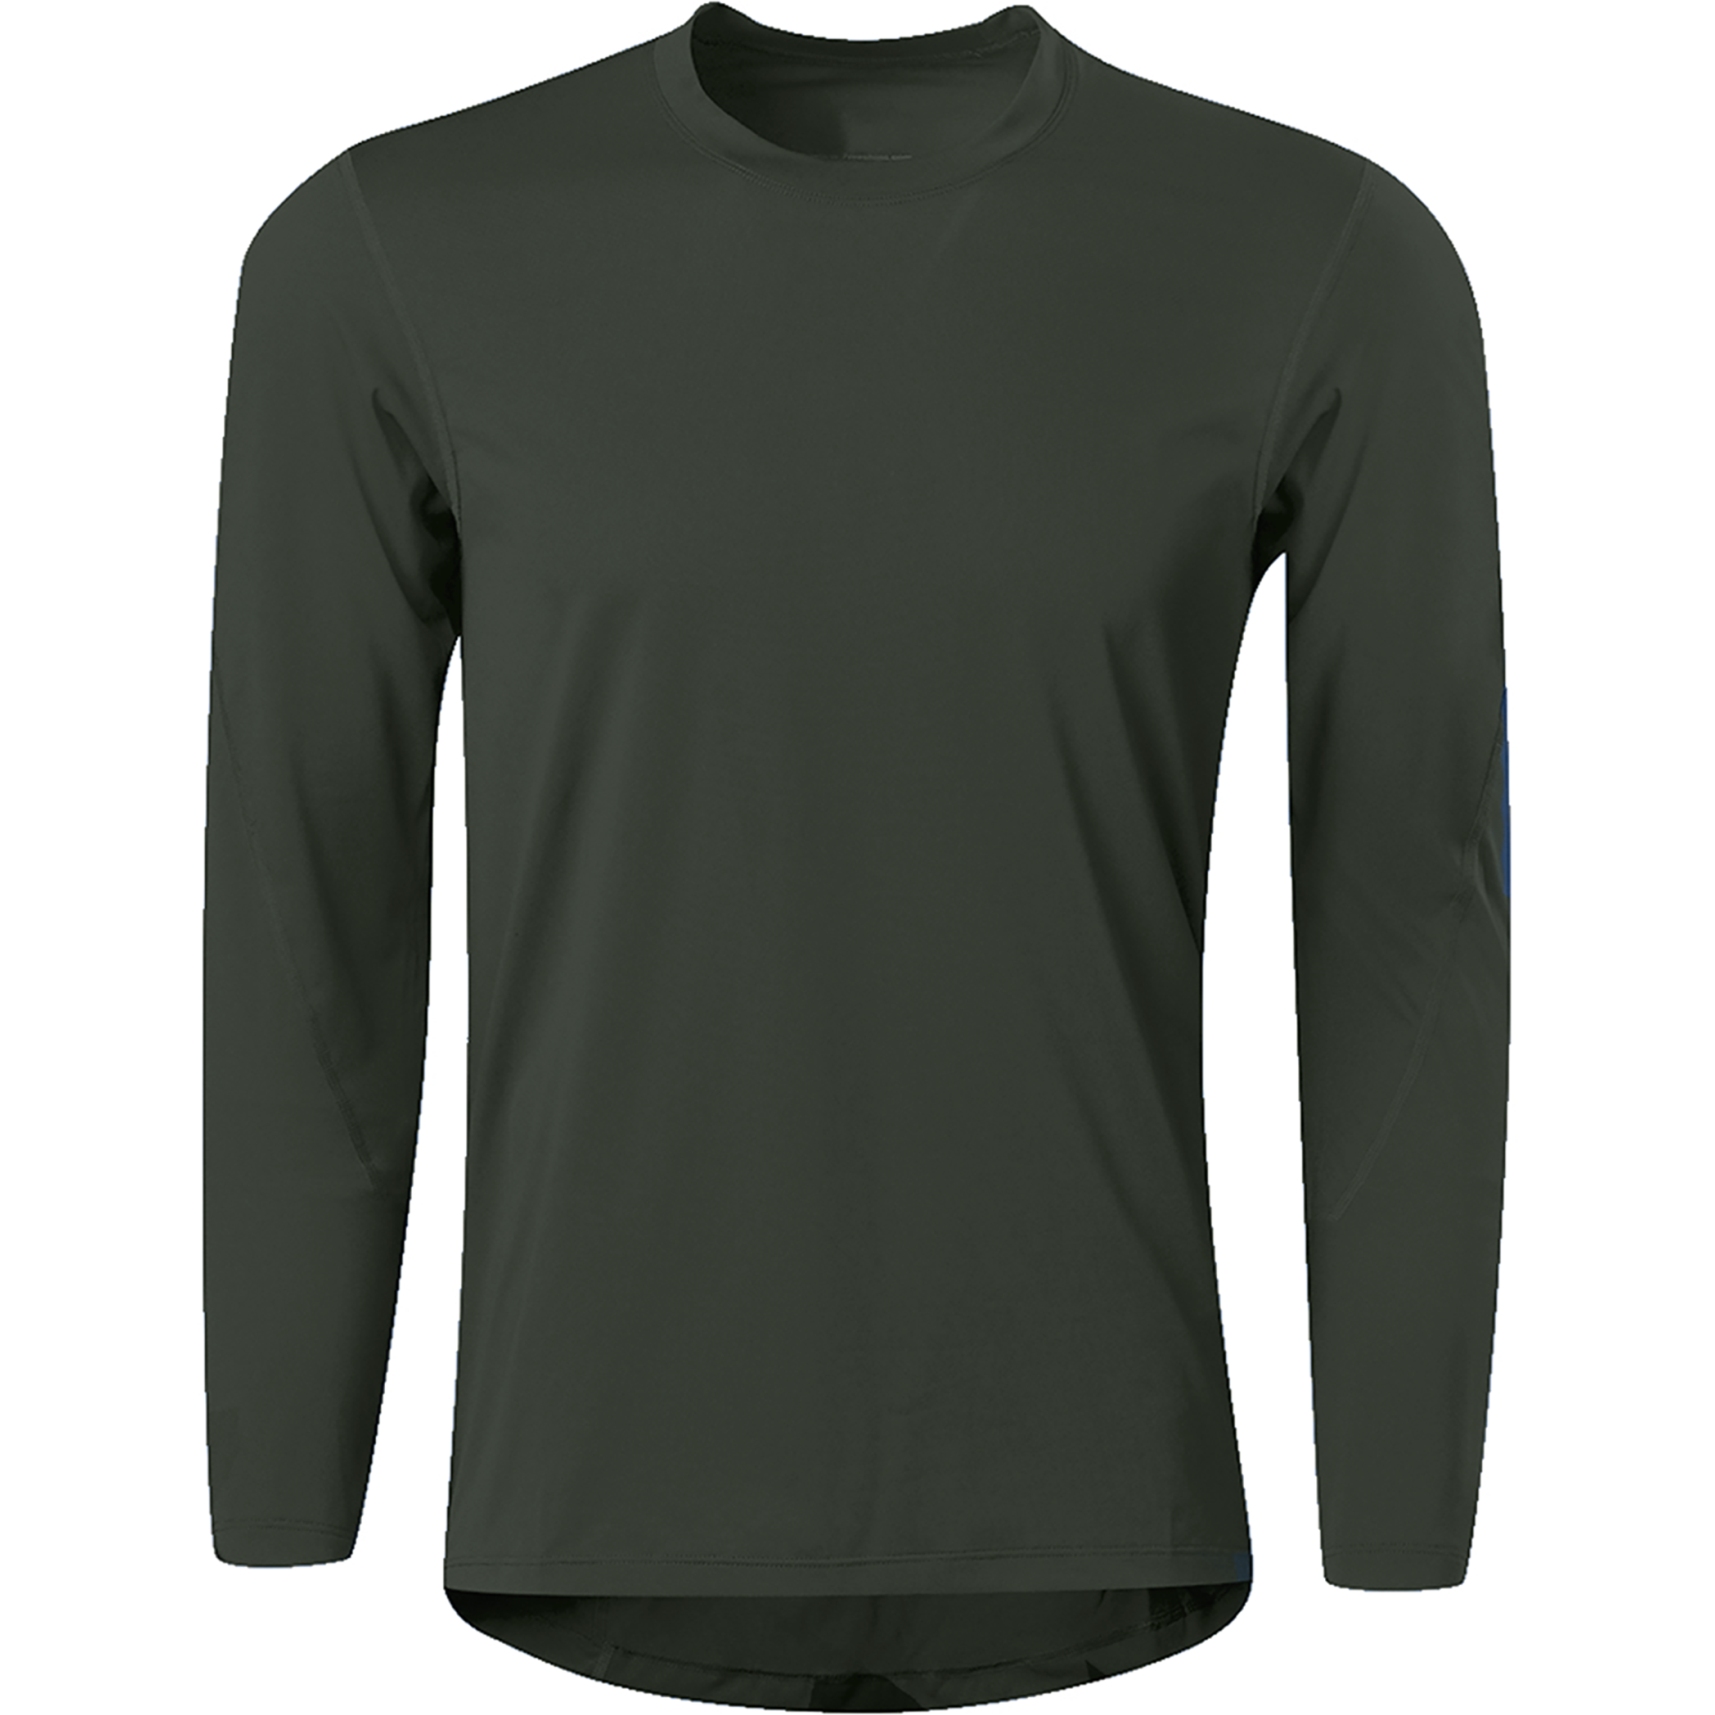 Picture of 7mesh Sight Longsleeve Shirt - Thyme